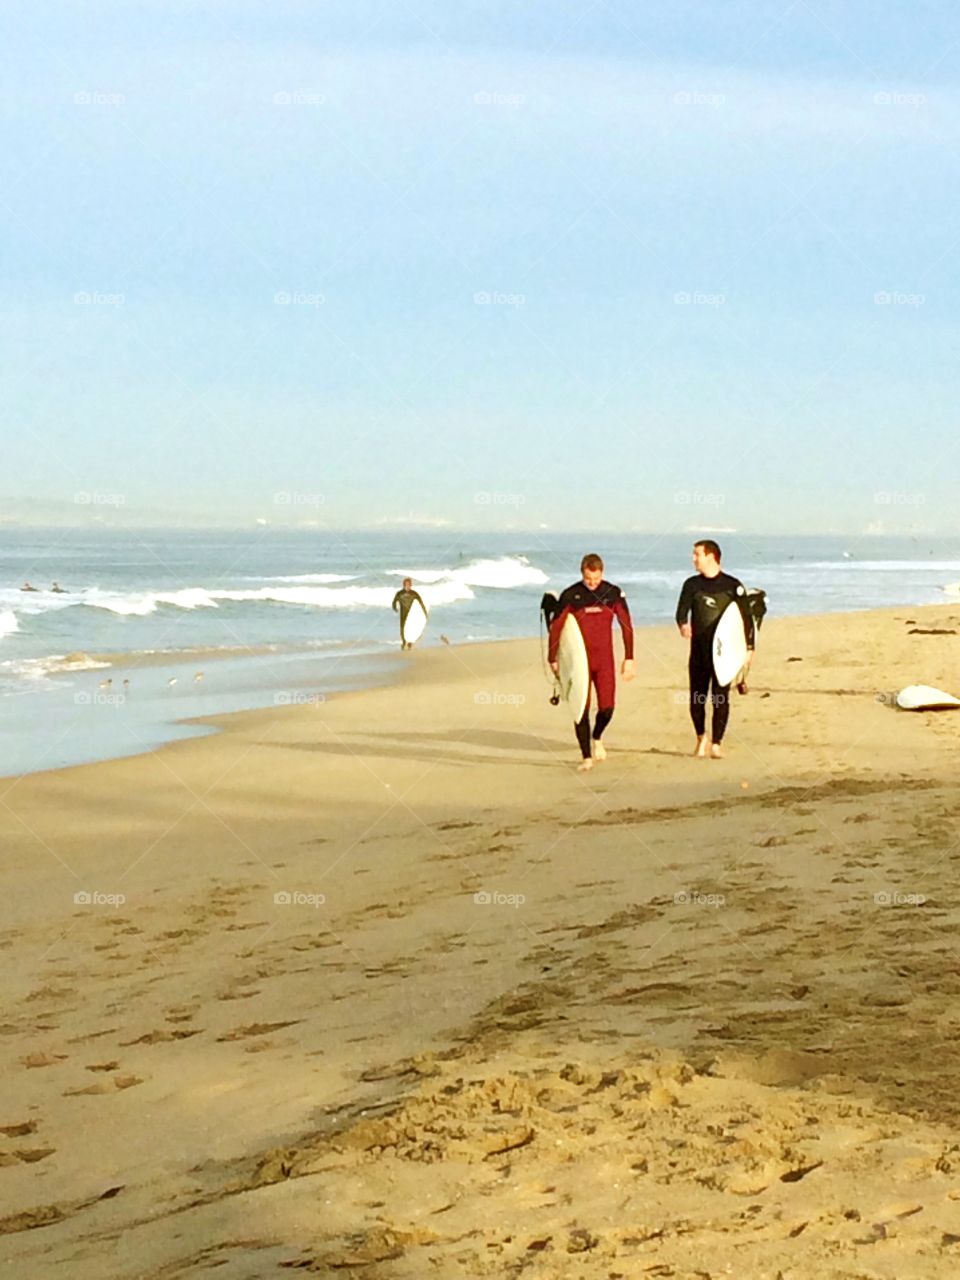 Heading to the office. Surfers walking the shoreline.